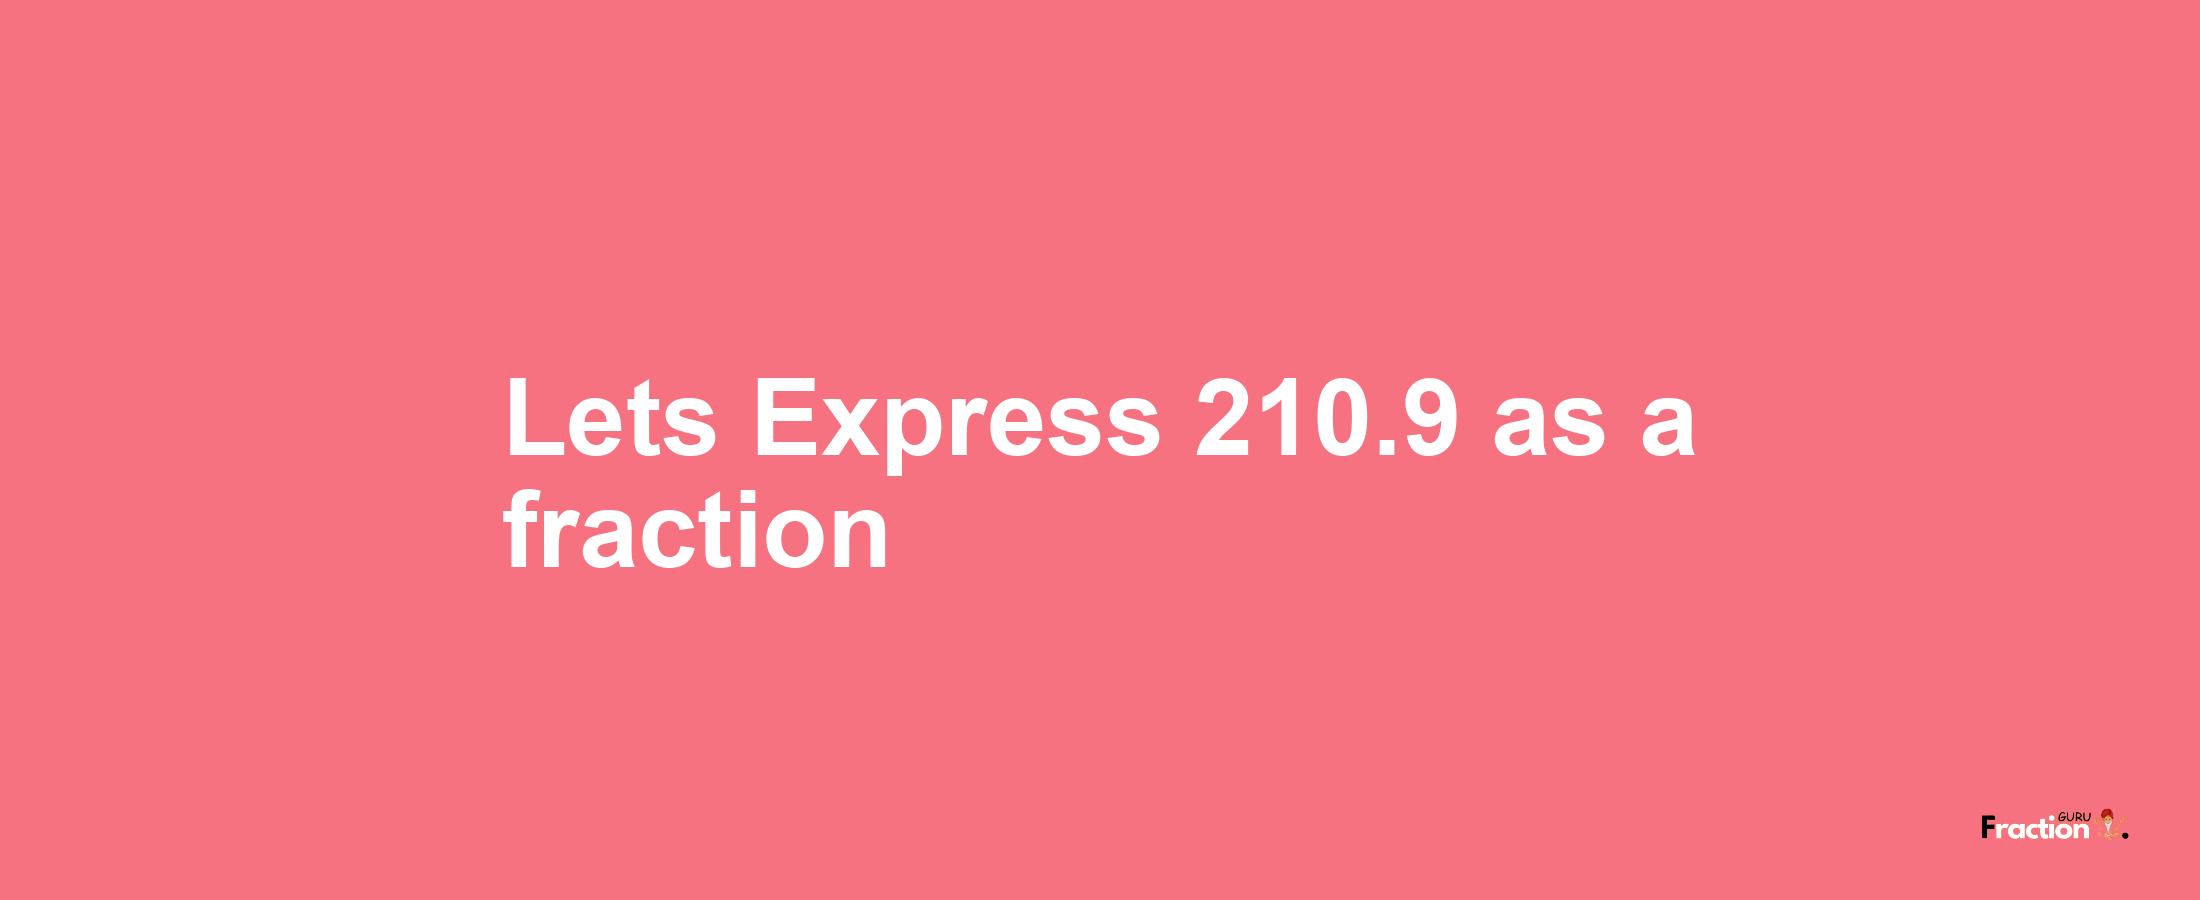 Lets Express 210.9 as afraction